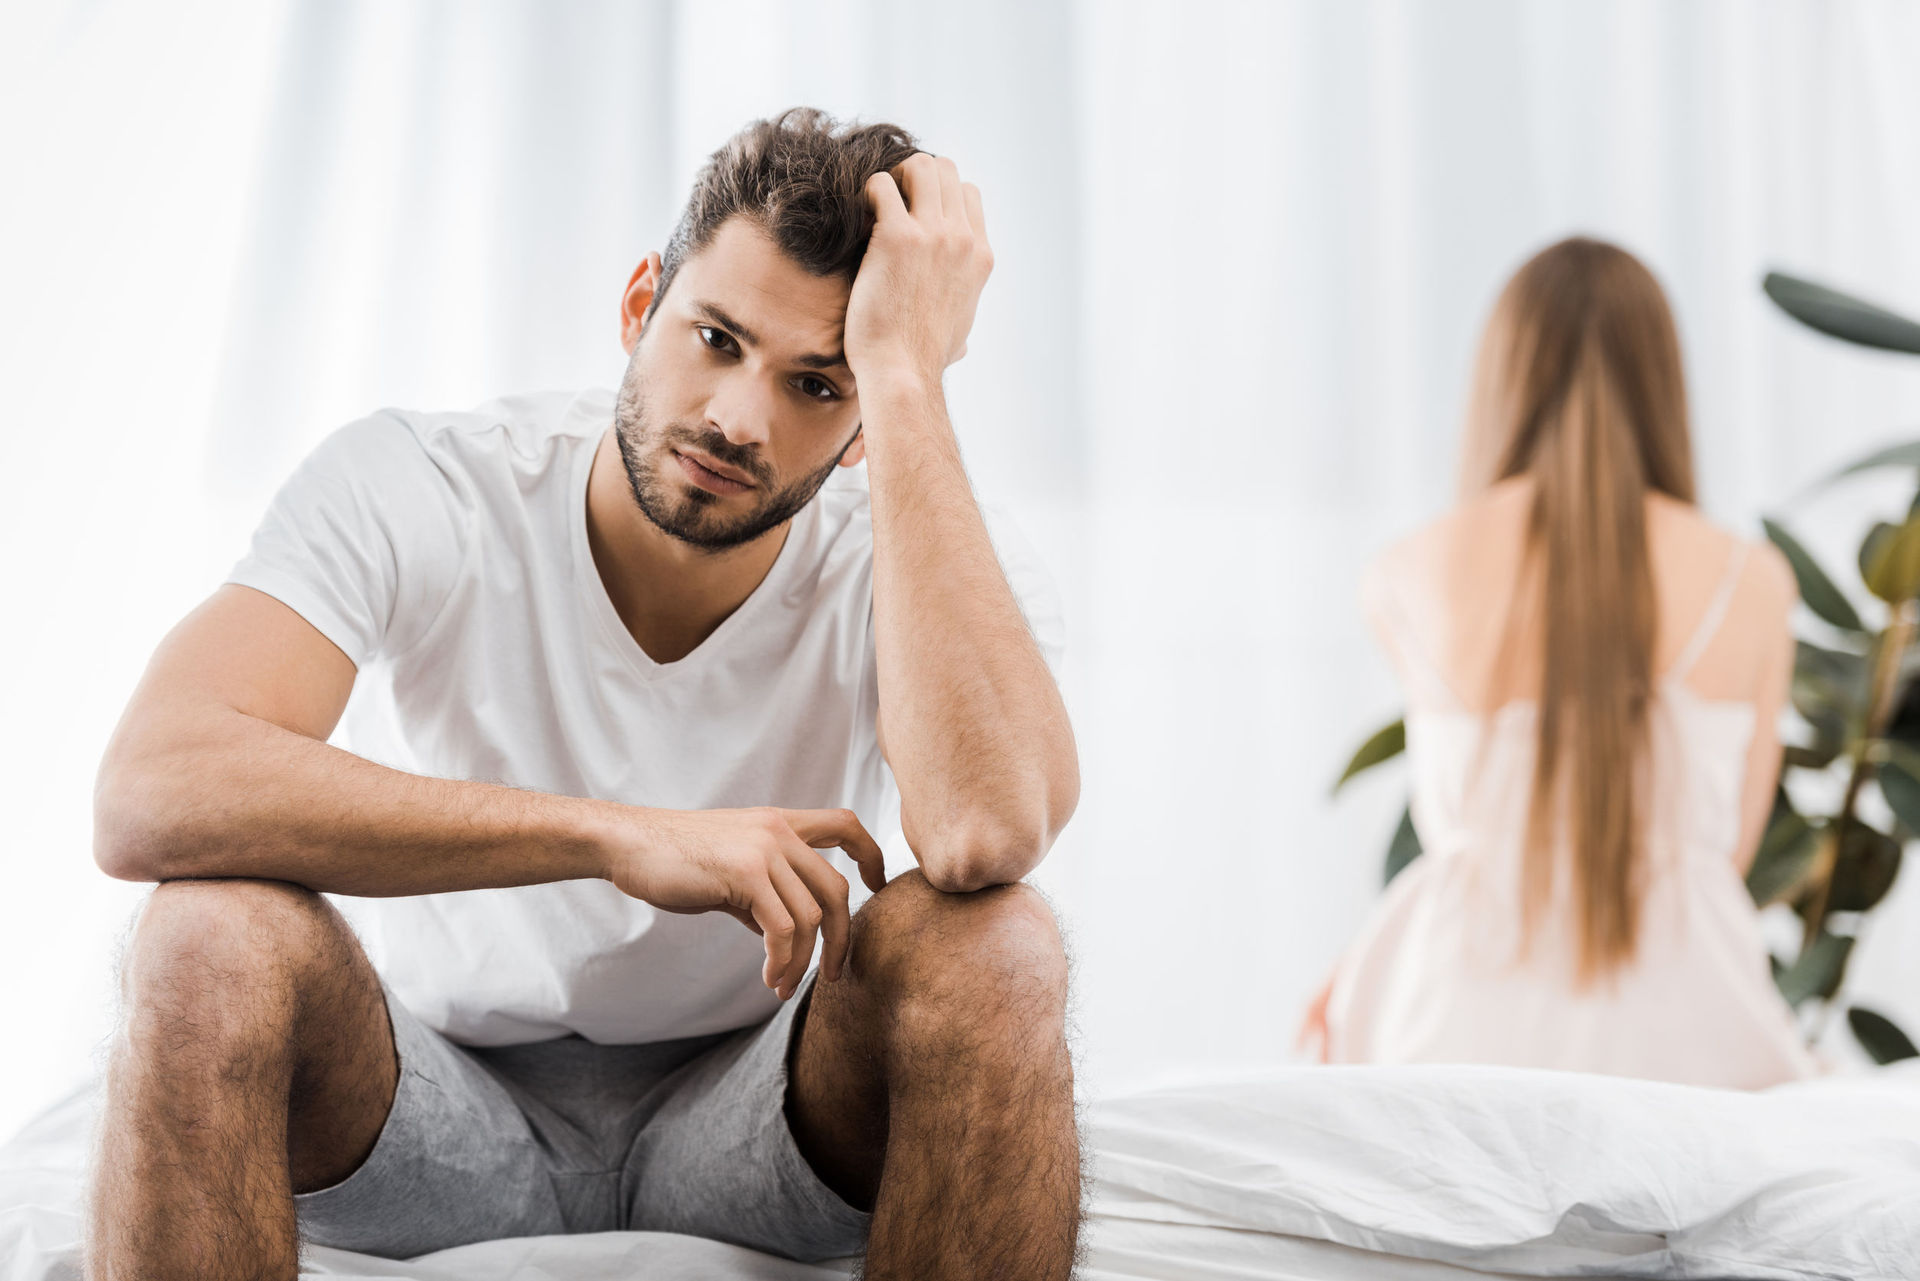 Relationship Rehab Husbands despair at sex with perfect wife